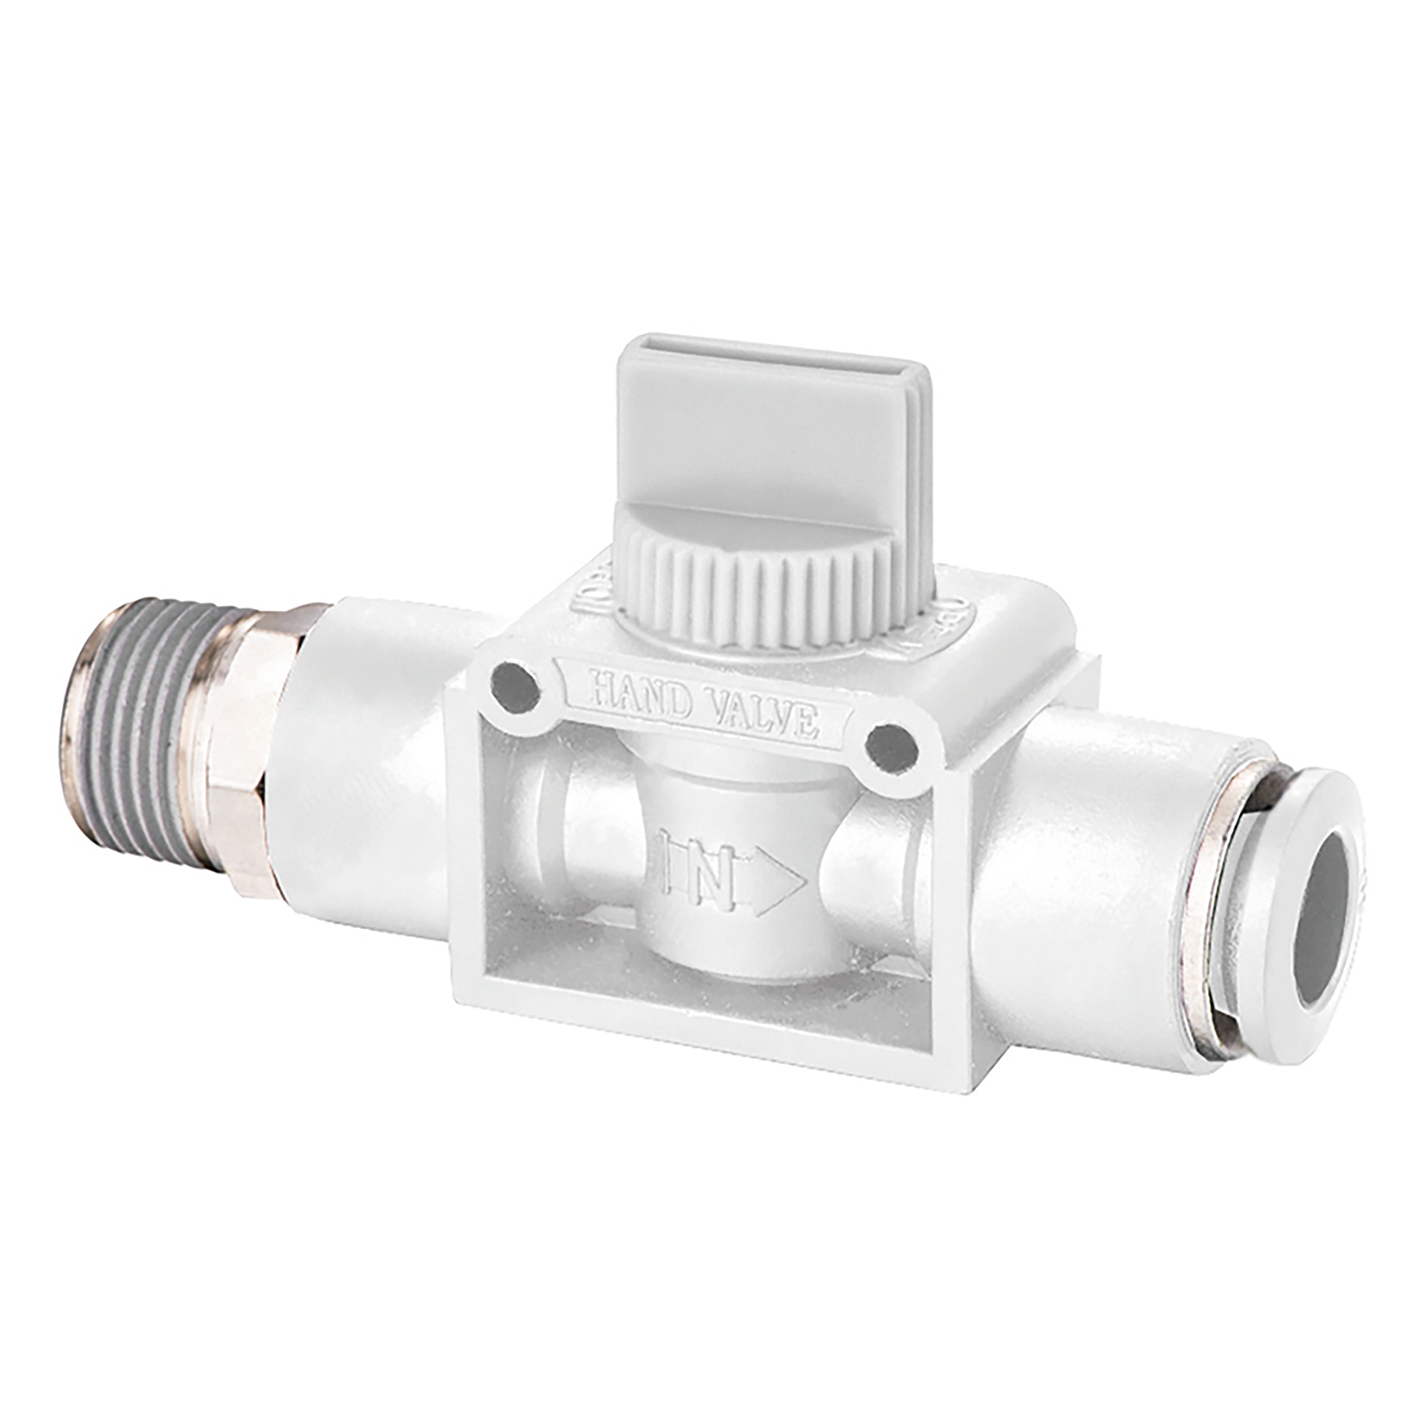 3/8" BSPT Male x 12mm OD 3 Way Vented Ball Valve